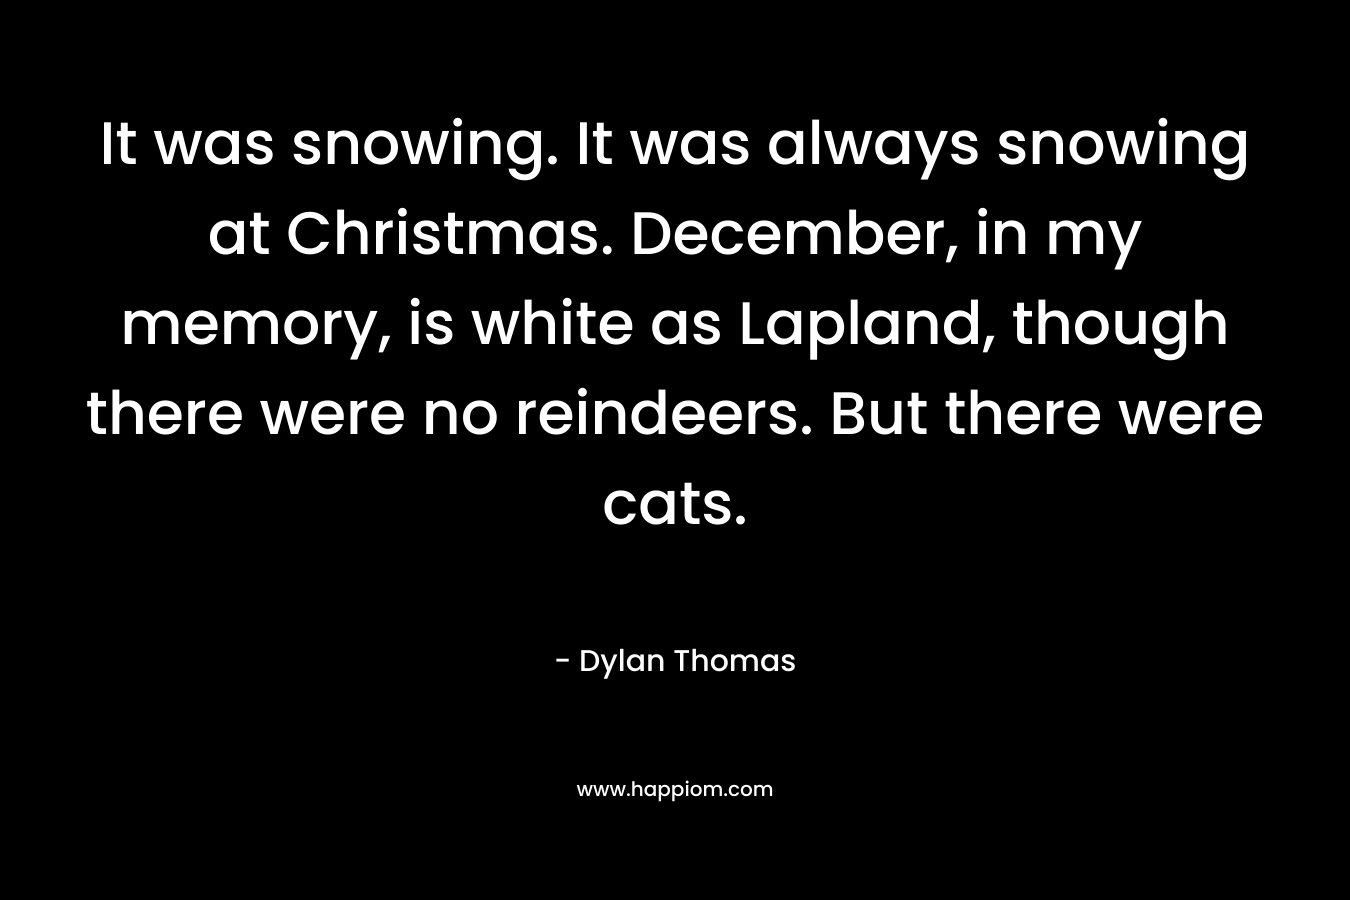 It was snowing. It was always snowing at Christmas. December, in my memory, is white as Lapland, though there were no reindeers. But there were cats. – Dylan Thomas